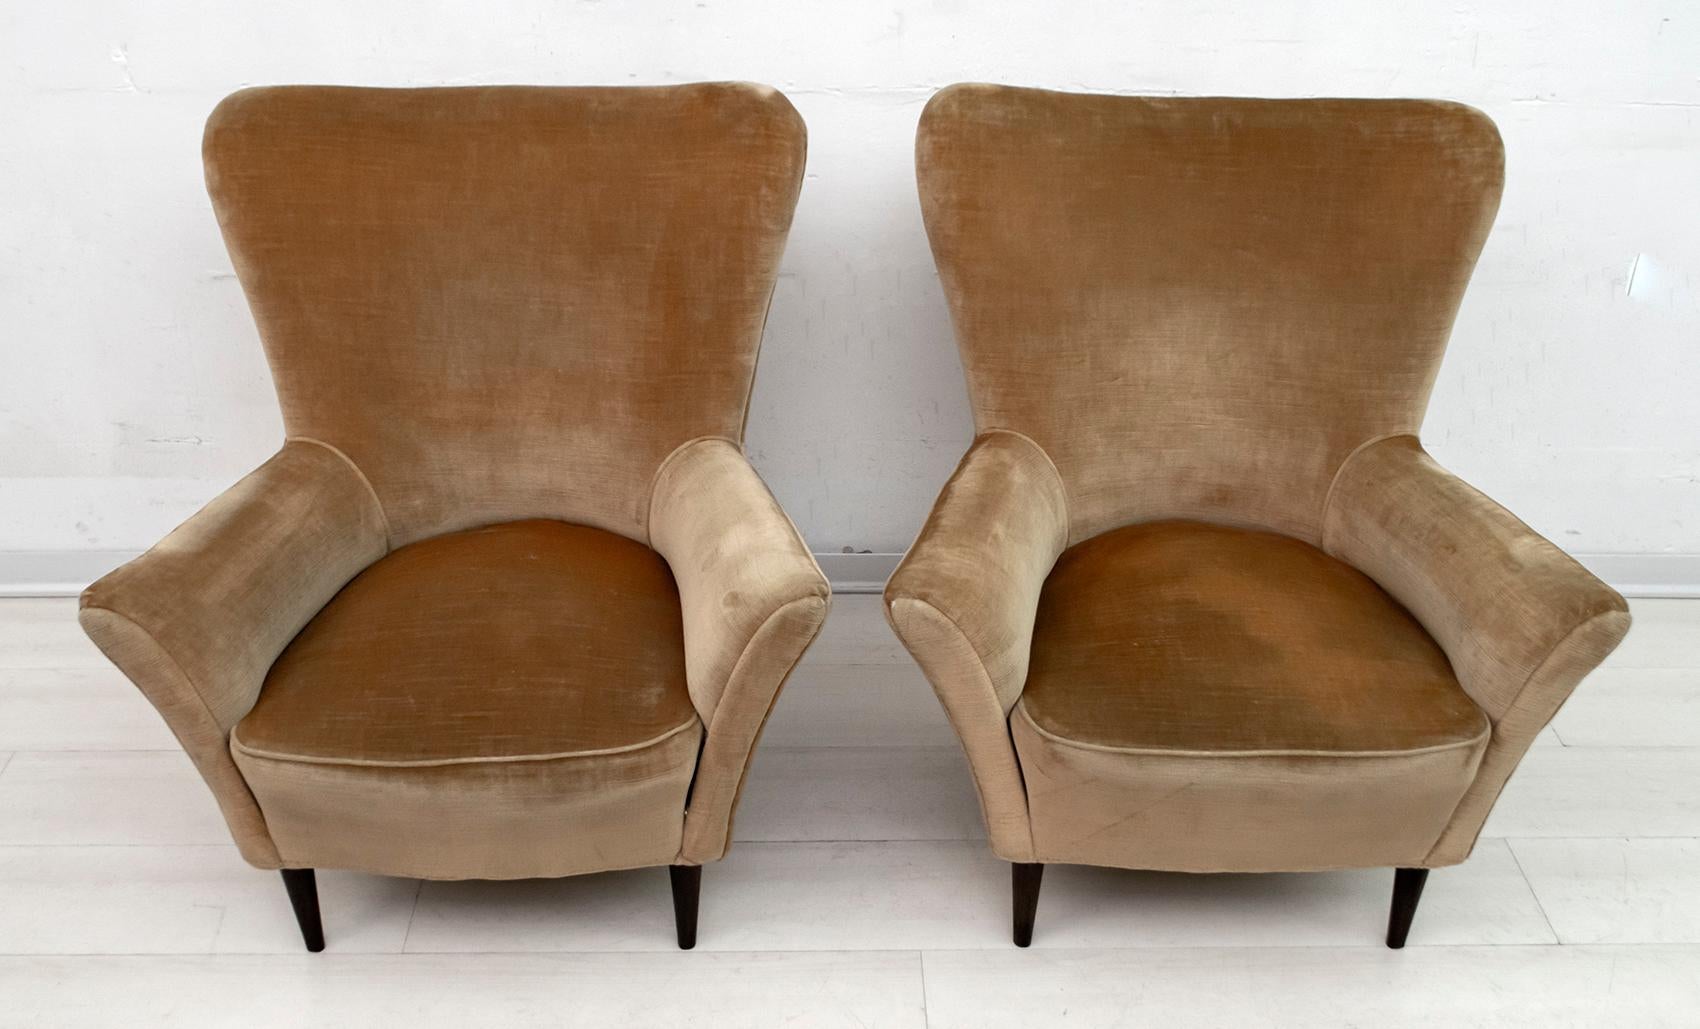 Elegant and splendid pair of Mid-Century Modern small armchairs, attributed to Gio Ponti, 1950 for ISA Editions, Bergamo. Sculpted profile, refined lines, sensual and deep comfort. The chairs have their original velvet upholstery; it is recommended